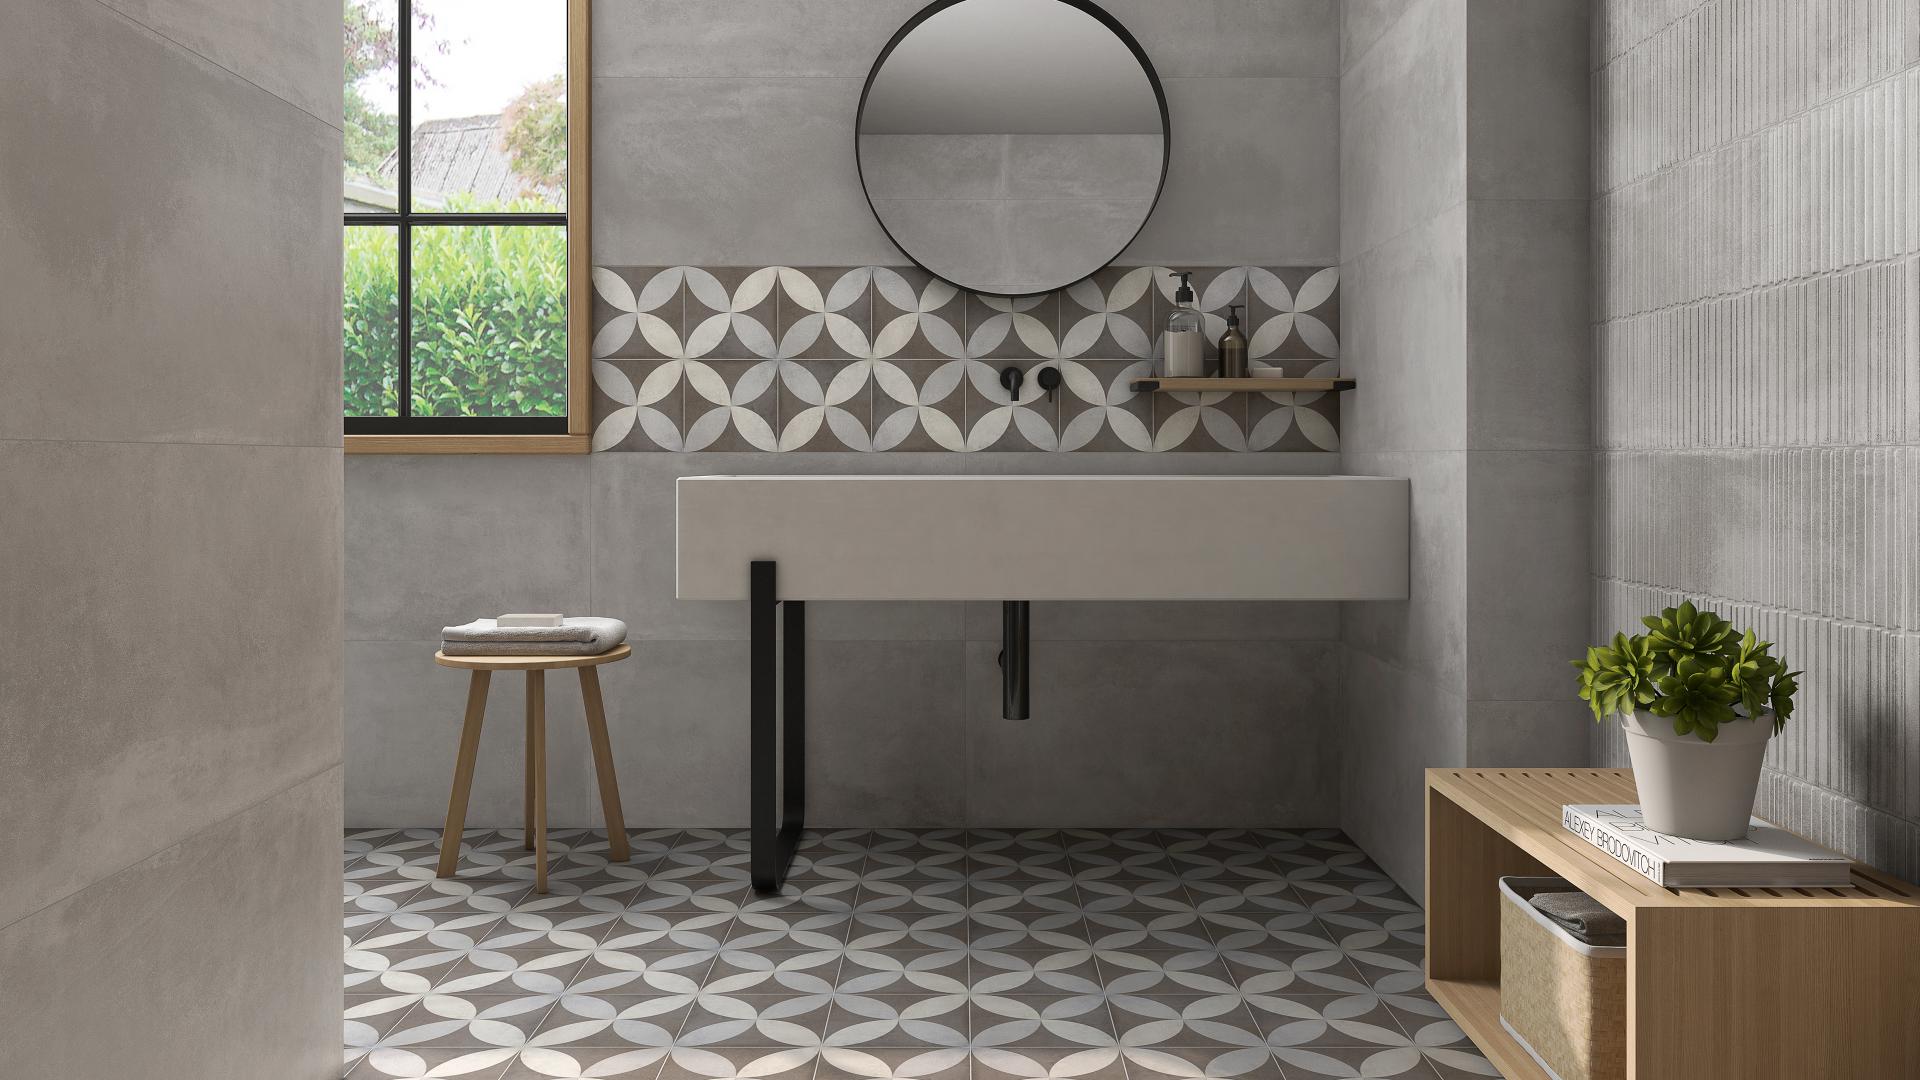 Lepic tiles featured in modern bathroom with grey walls